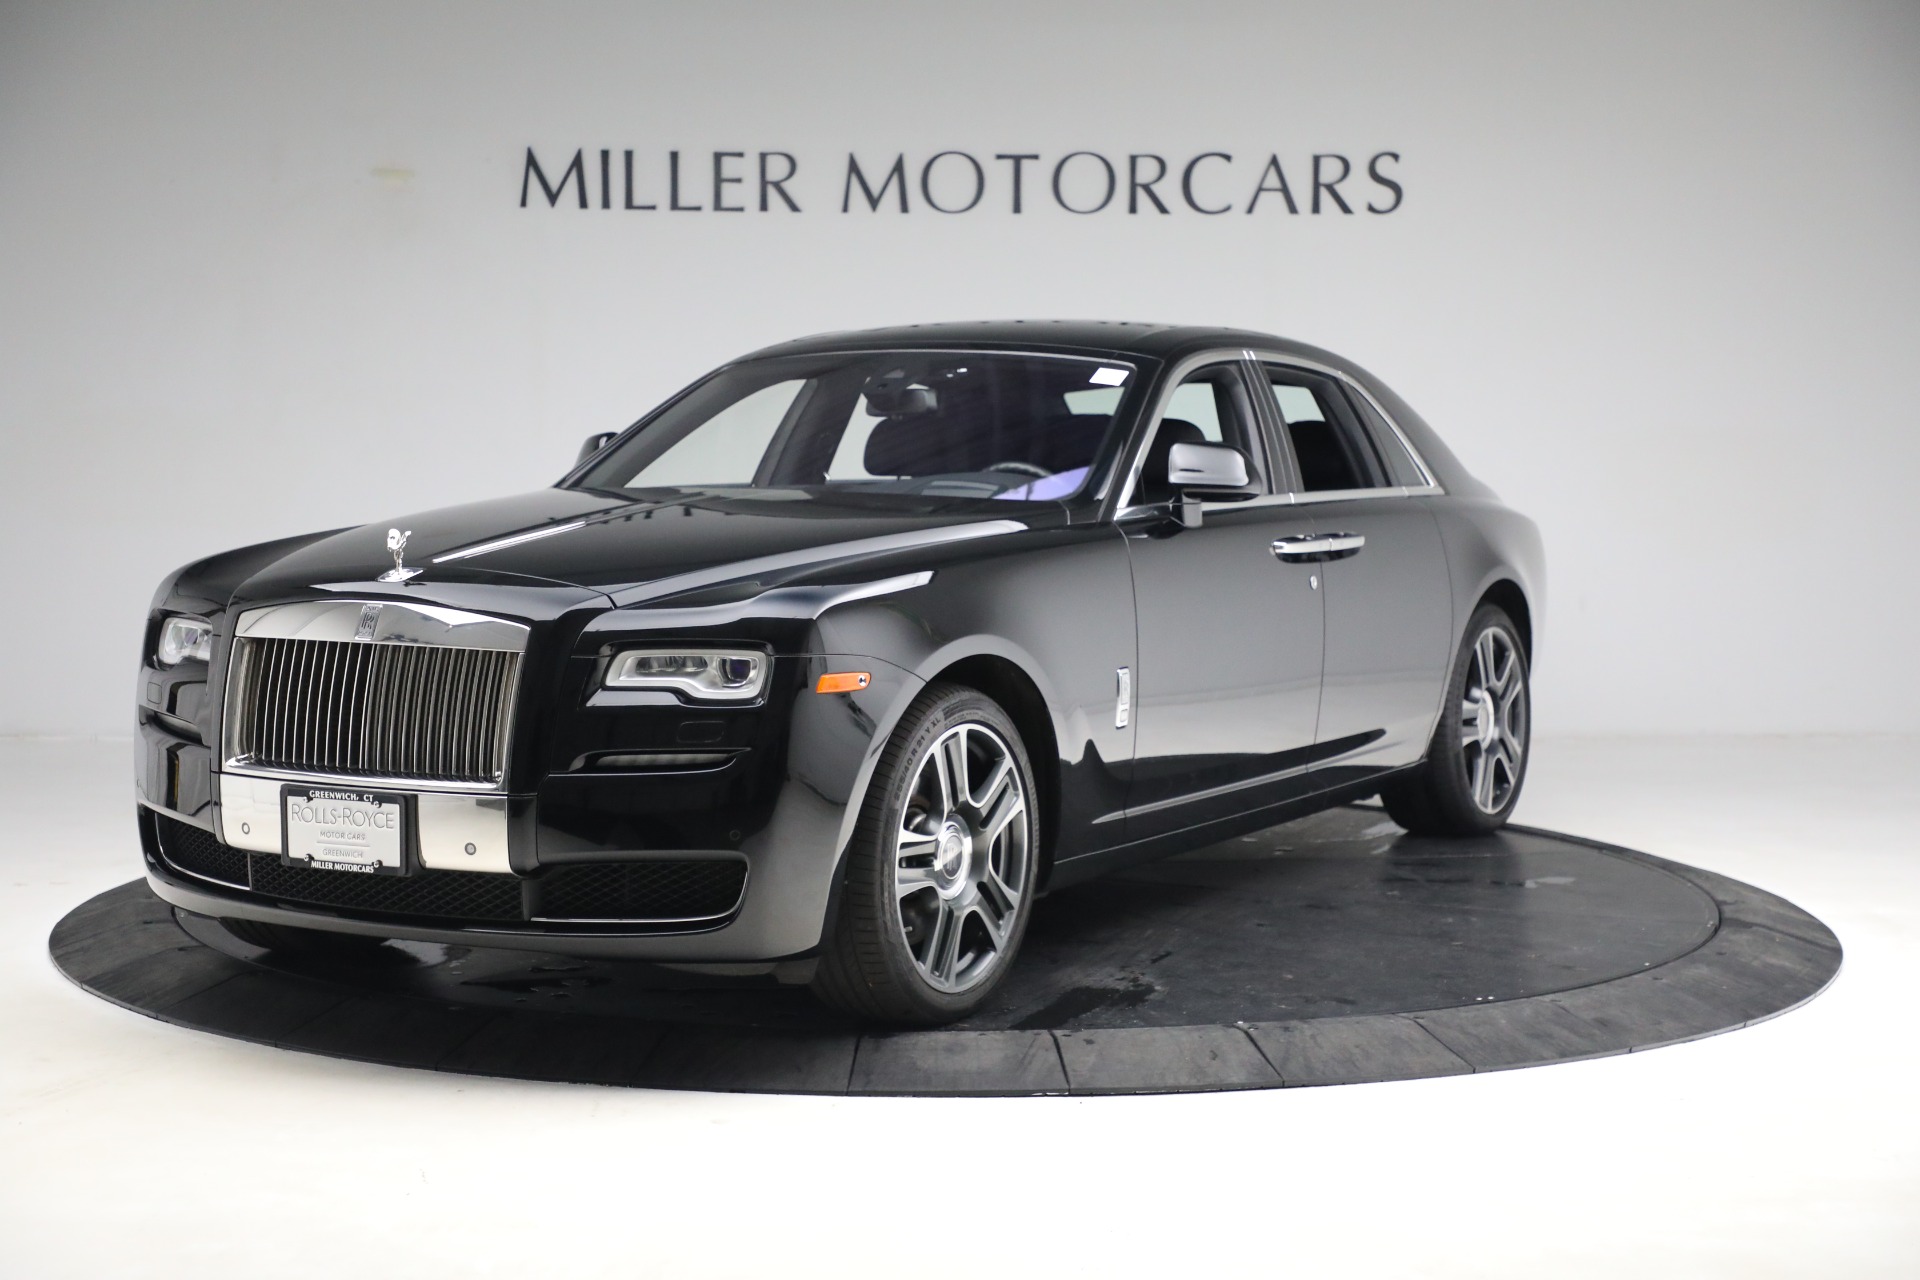 Used 2016 Rolls-Royce Ghost Series II for sale Sold at Pagani of Greenwich in Greenwich CT 06830 1